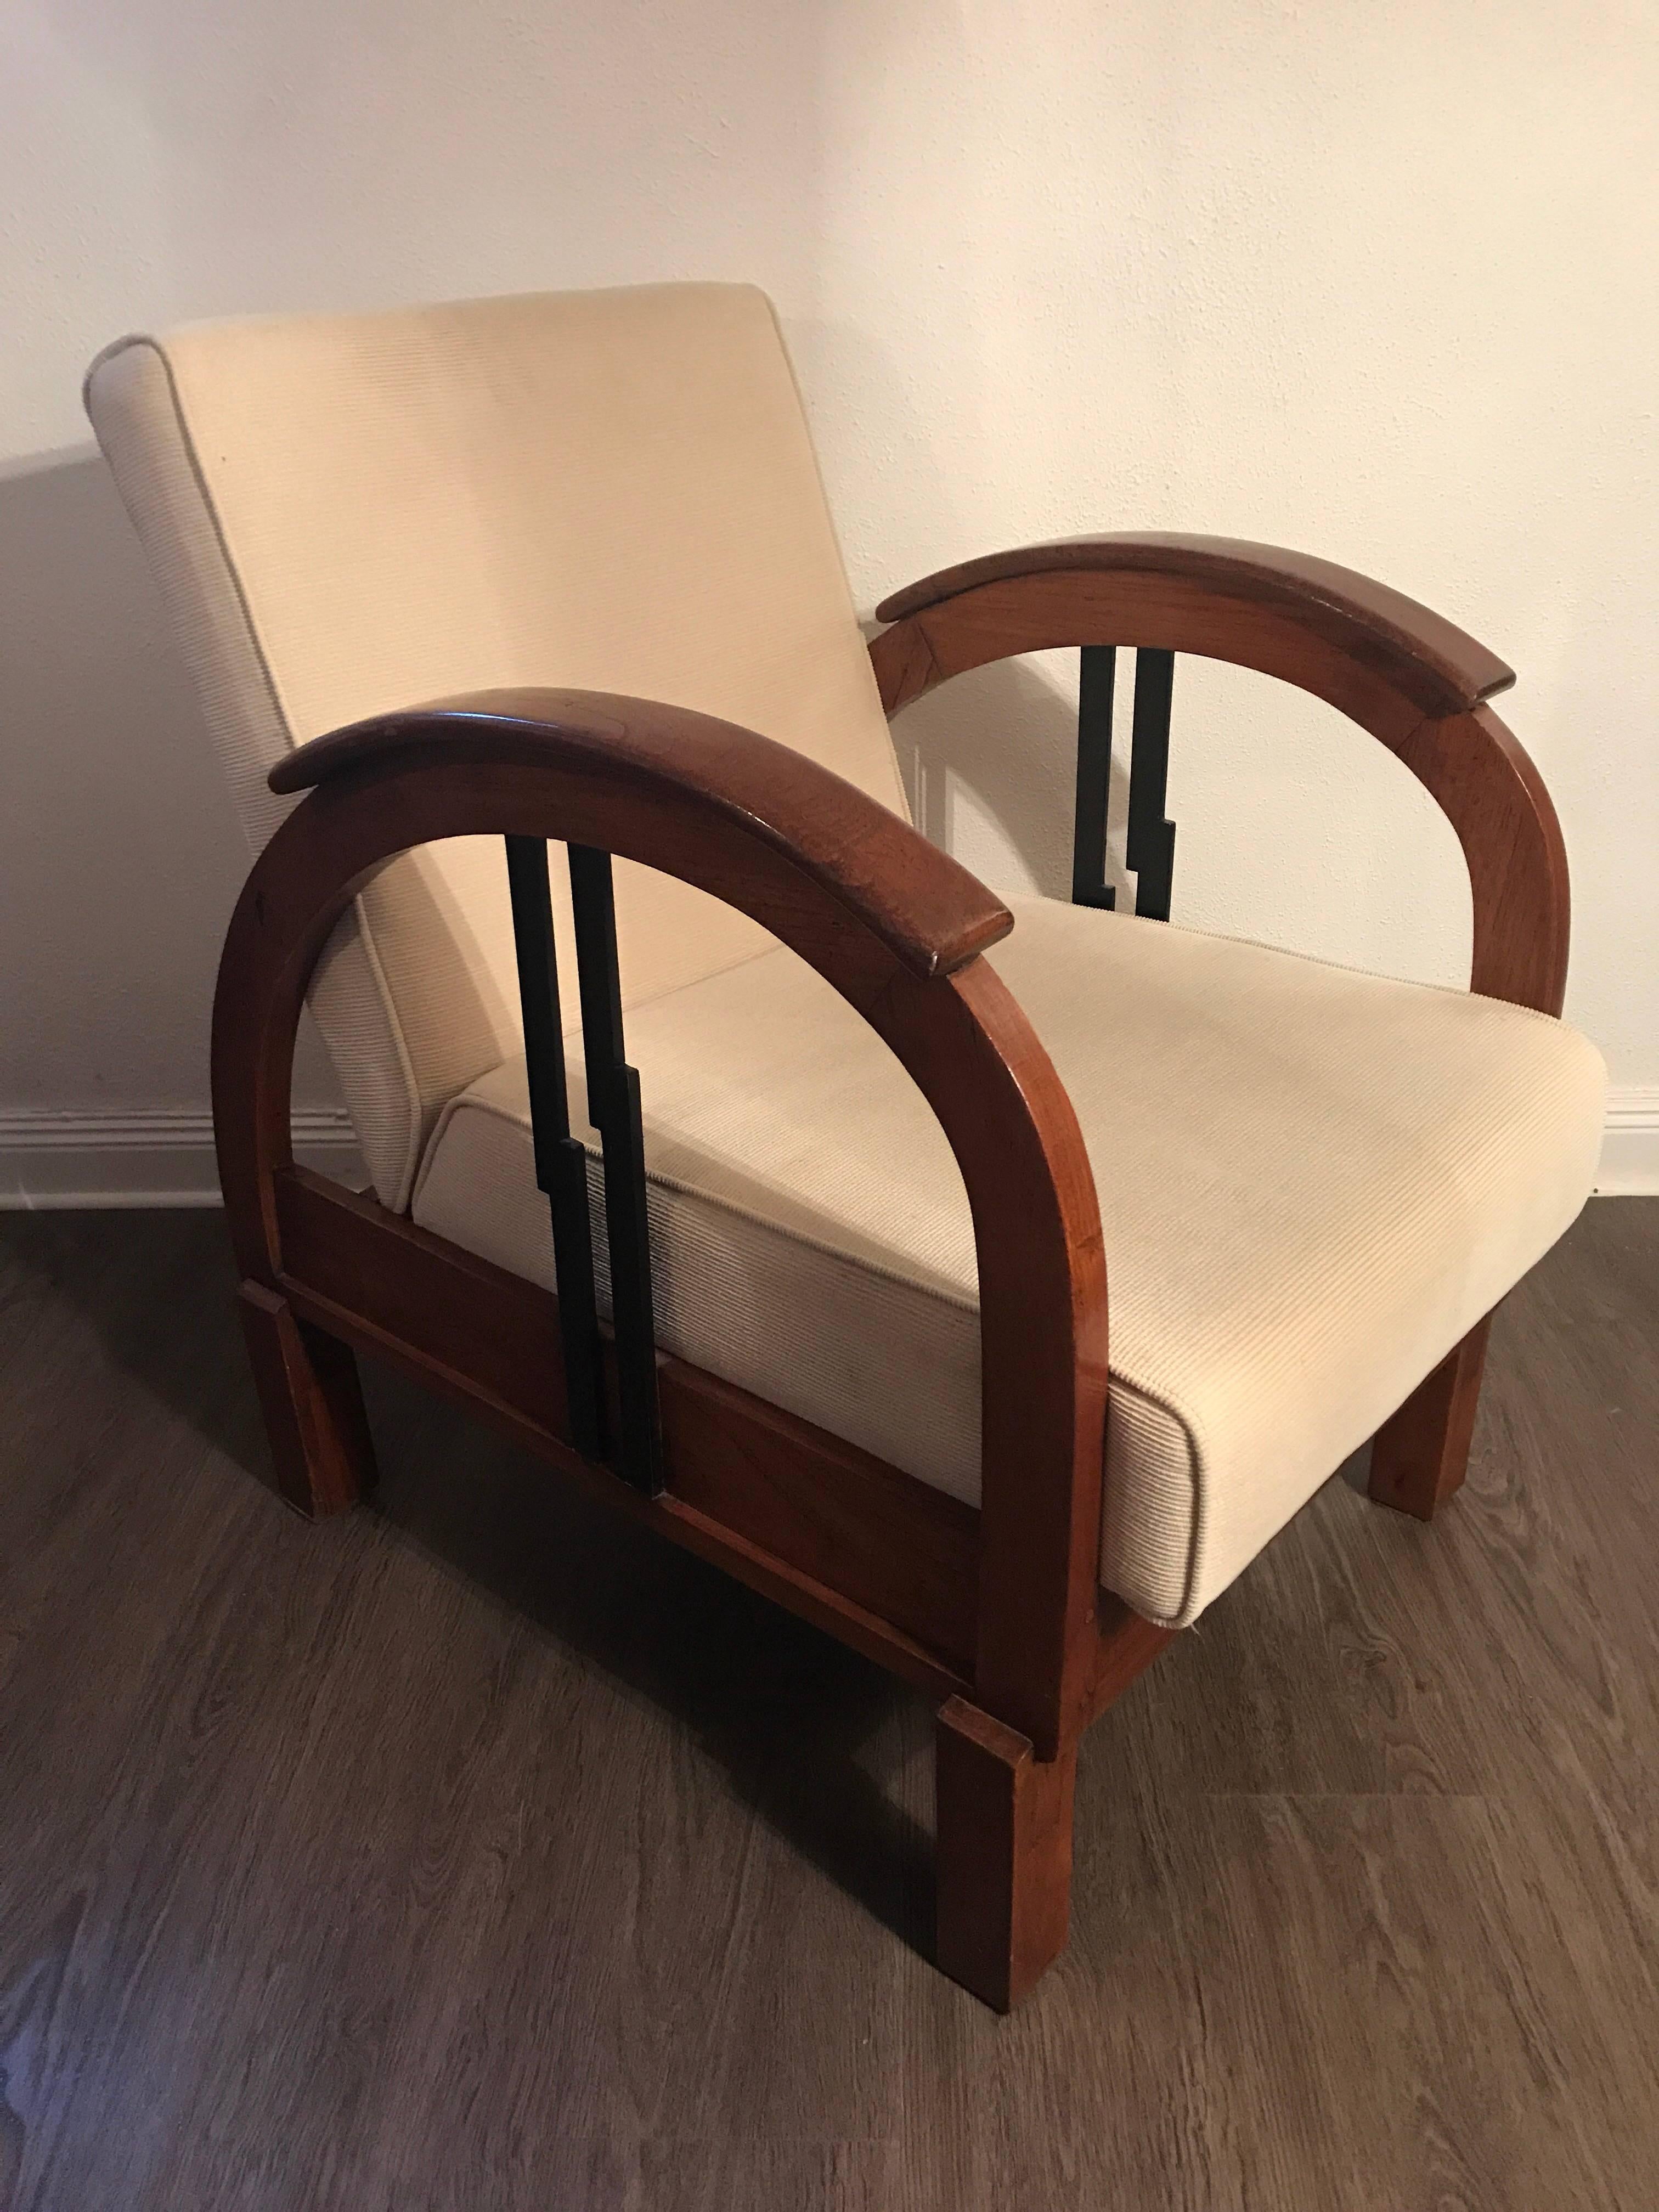 Pair French 1930 Art Deco Colonial Wood Armchairs. 
A beautiful and rare pair of presumably elm wood art deco armchairs. These chairs were most likely made in France and are made in a very nice shape with the bow and semicircular armrests. They have